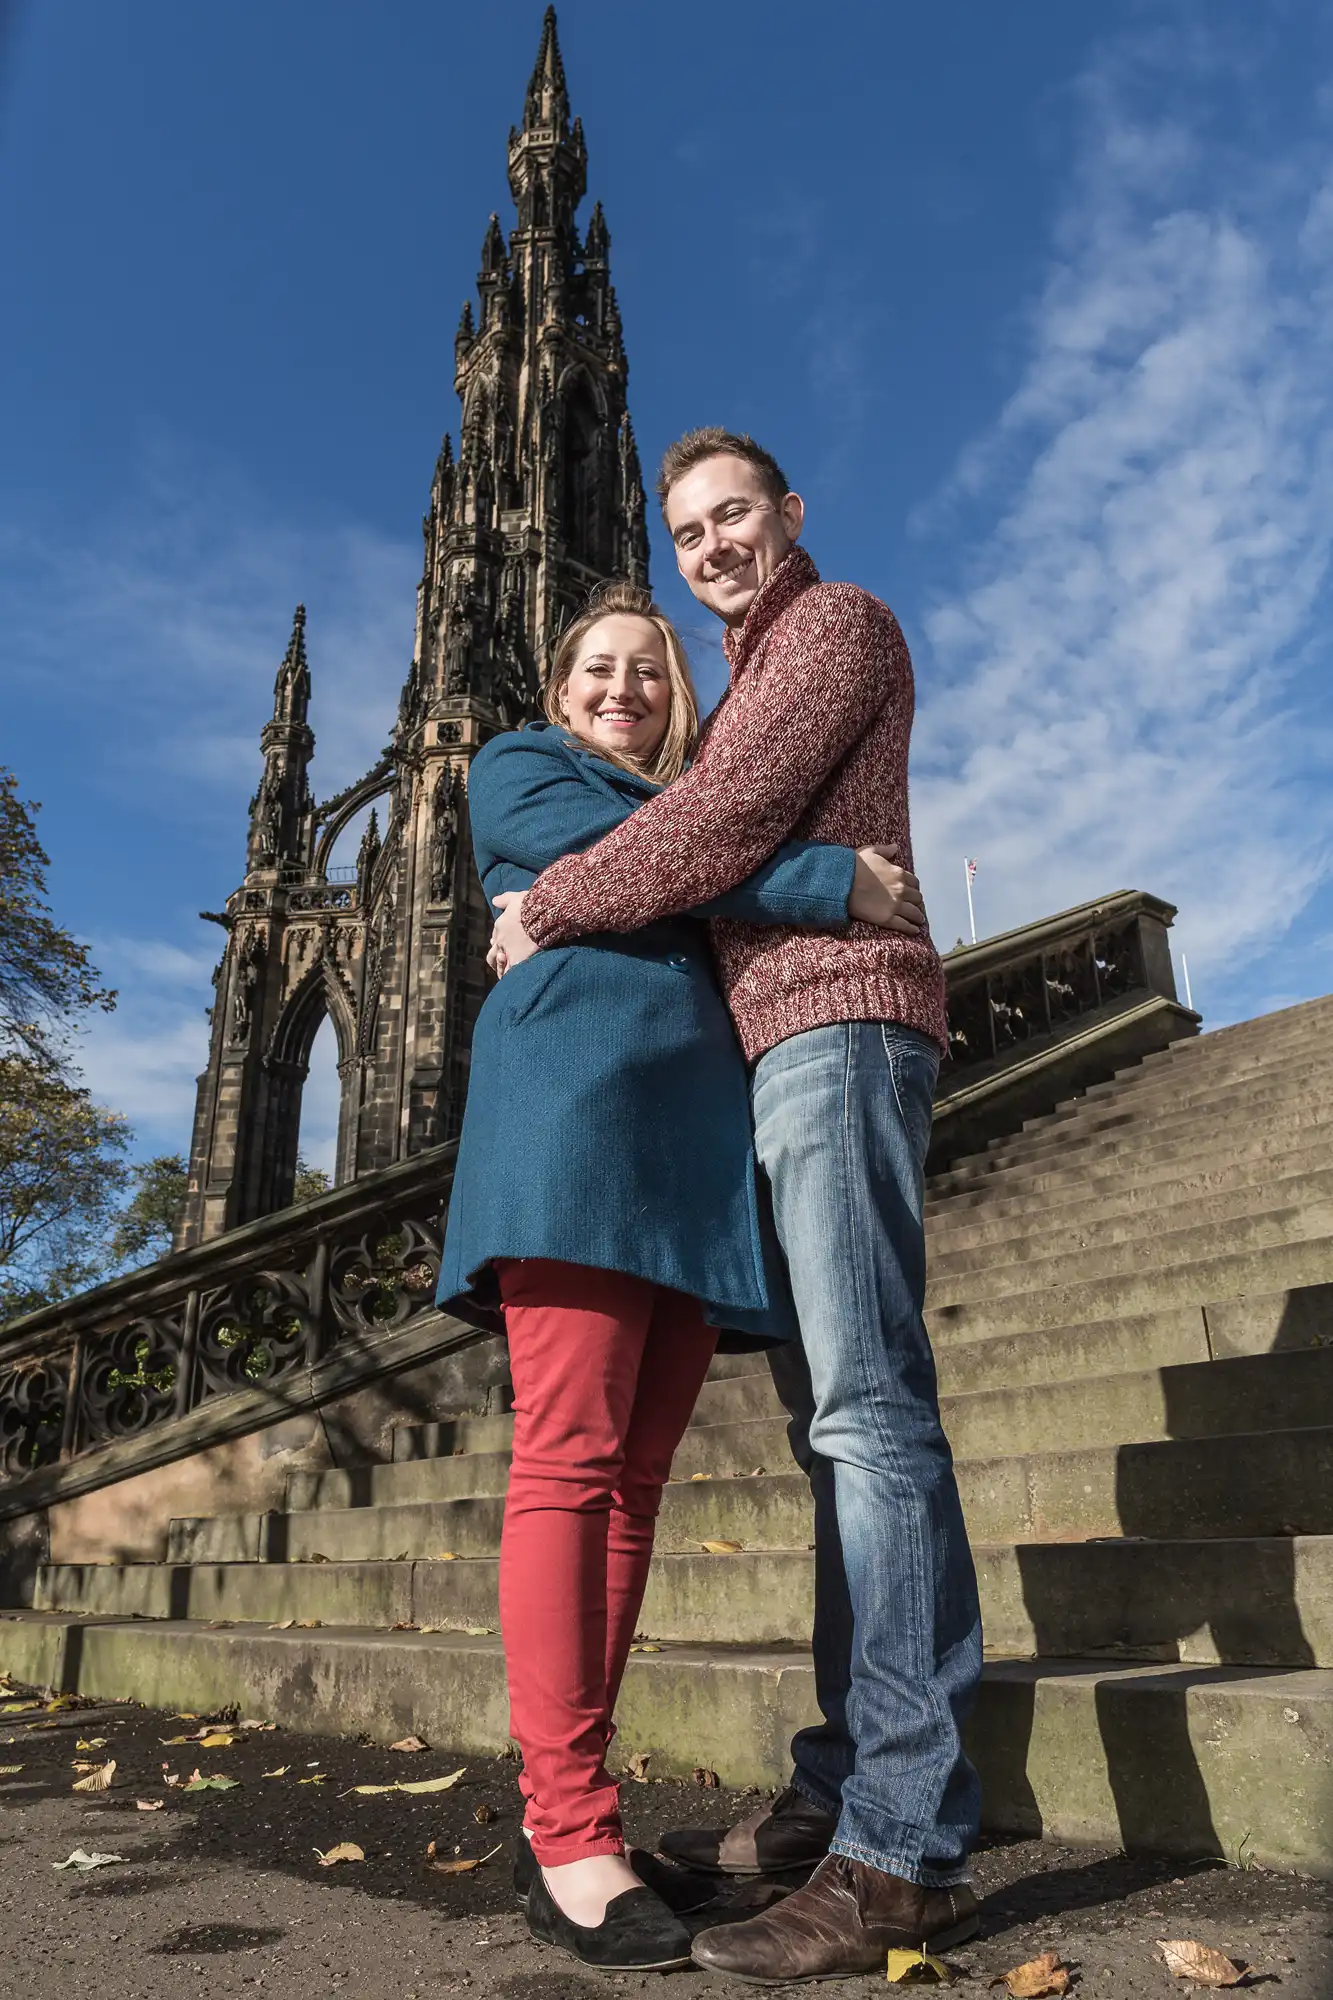 A couple embracing and smiling for the camera in front of the scott monument on a sunny day with clear blue skies.